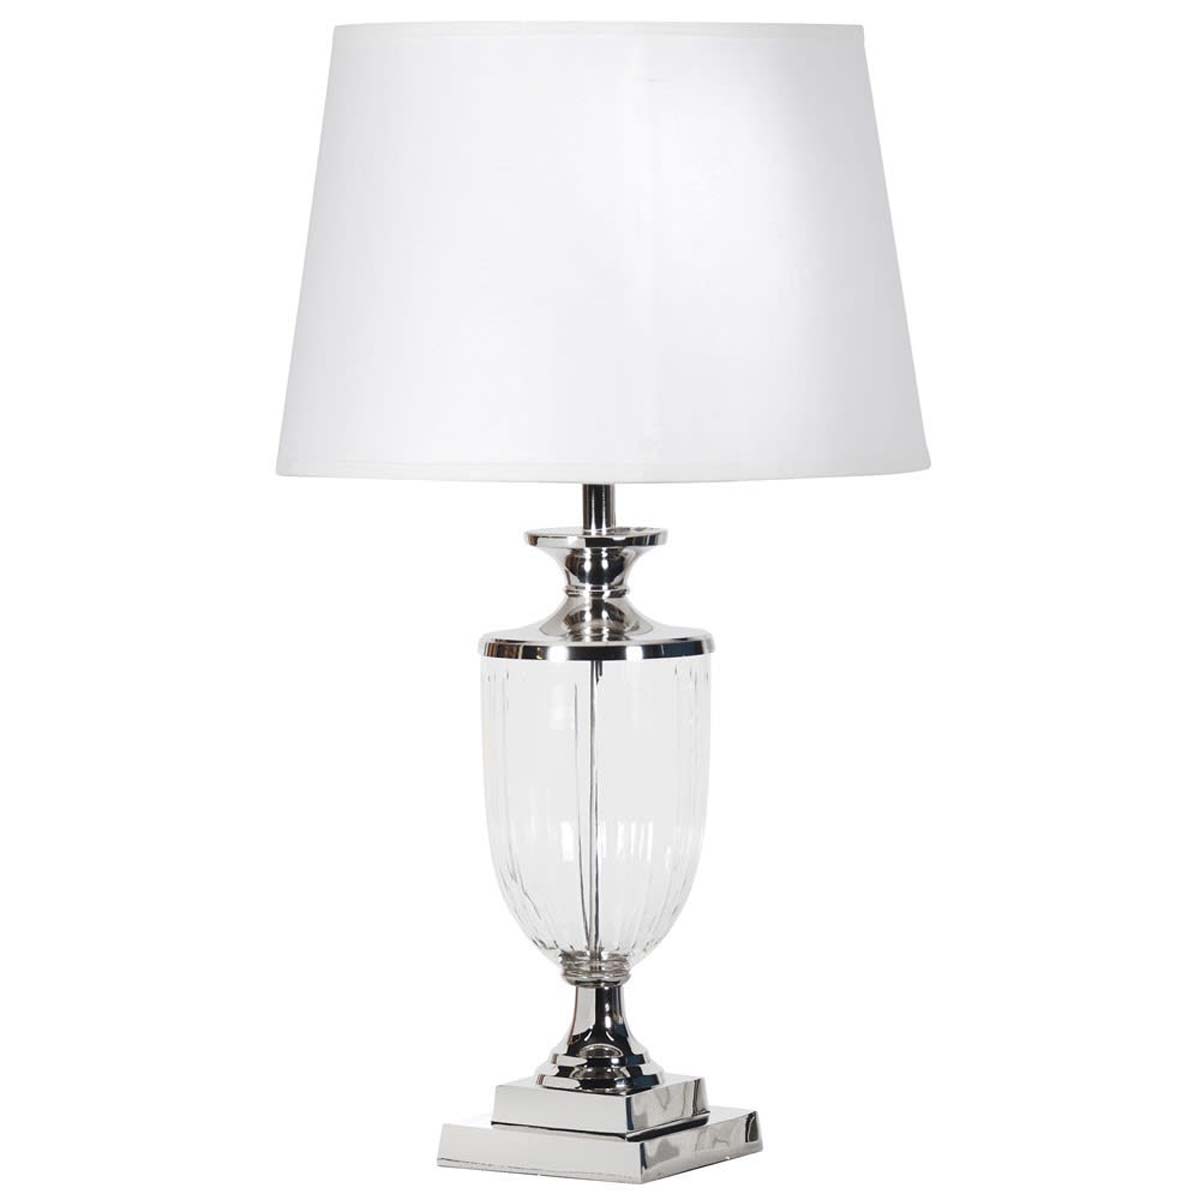 Tall Silver Glass Urn Table Lamp, Crystal Urn Table Lamp